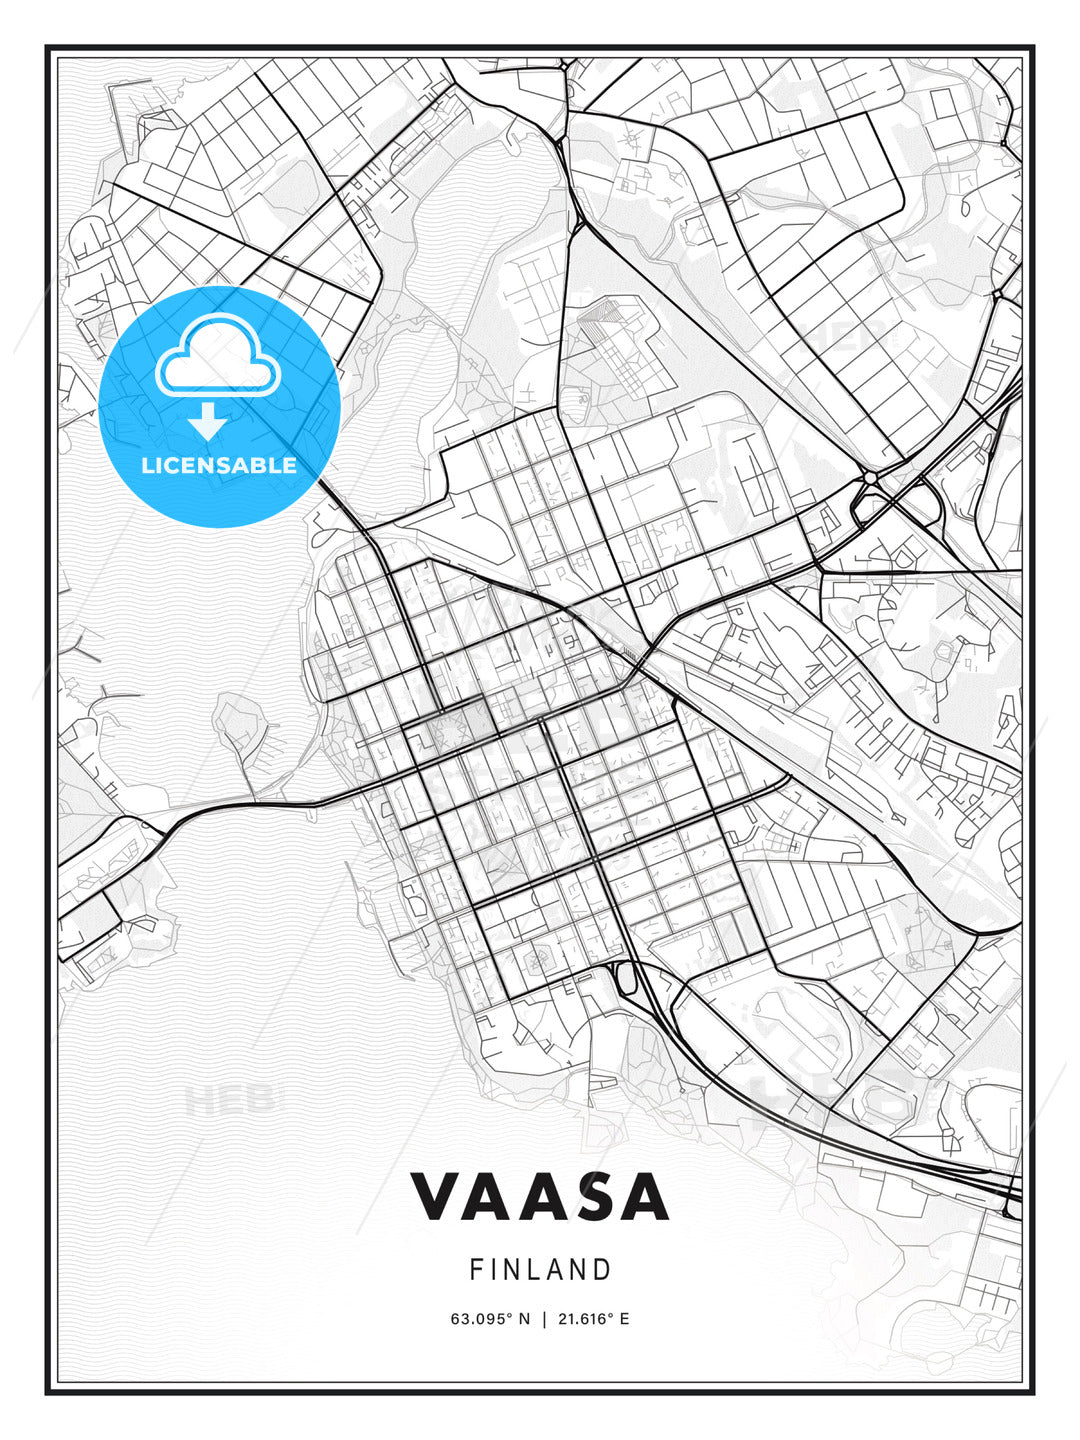 Vaasa, Finland, Modern Print Template in Various Formats - HEBSTREITS Sketches